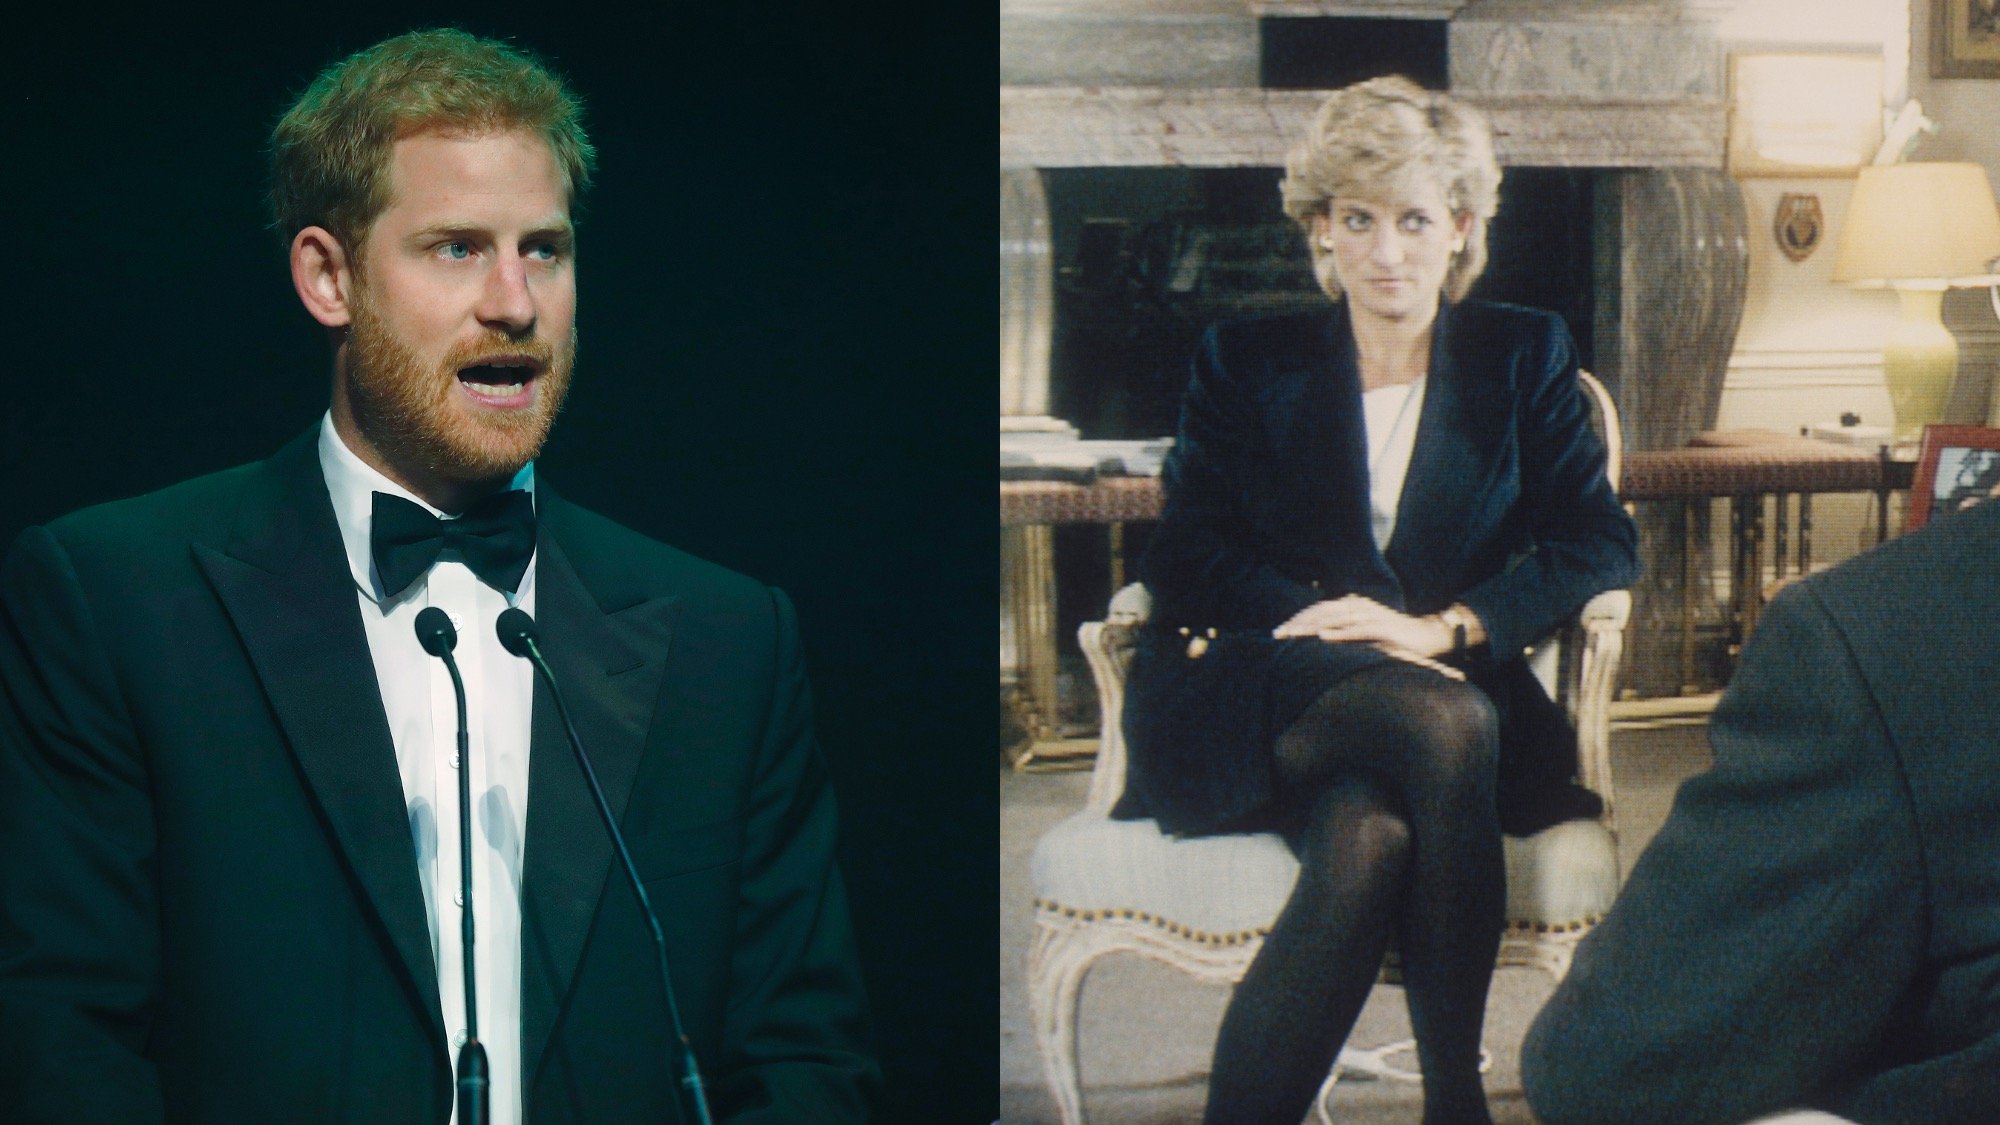 (L) Prince Harry talks after receiving a posthumous Attitude Legacy Award on behalf of his mother Diana, Princess of Wales, at the Attitude Awards on October 12, 2017 in London, England. (R) Princess Diana during an interview with Martin Bashir for BBC's 'Panorama'.